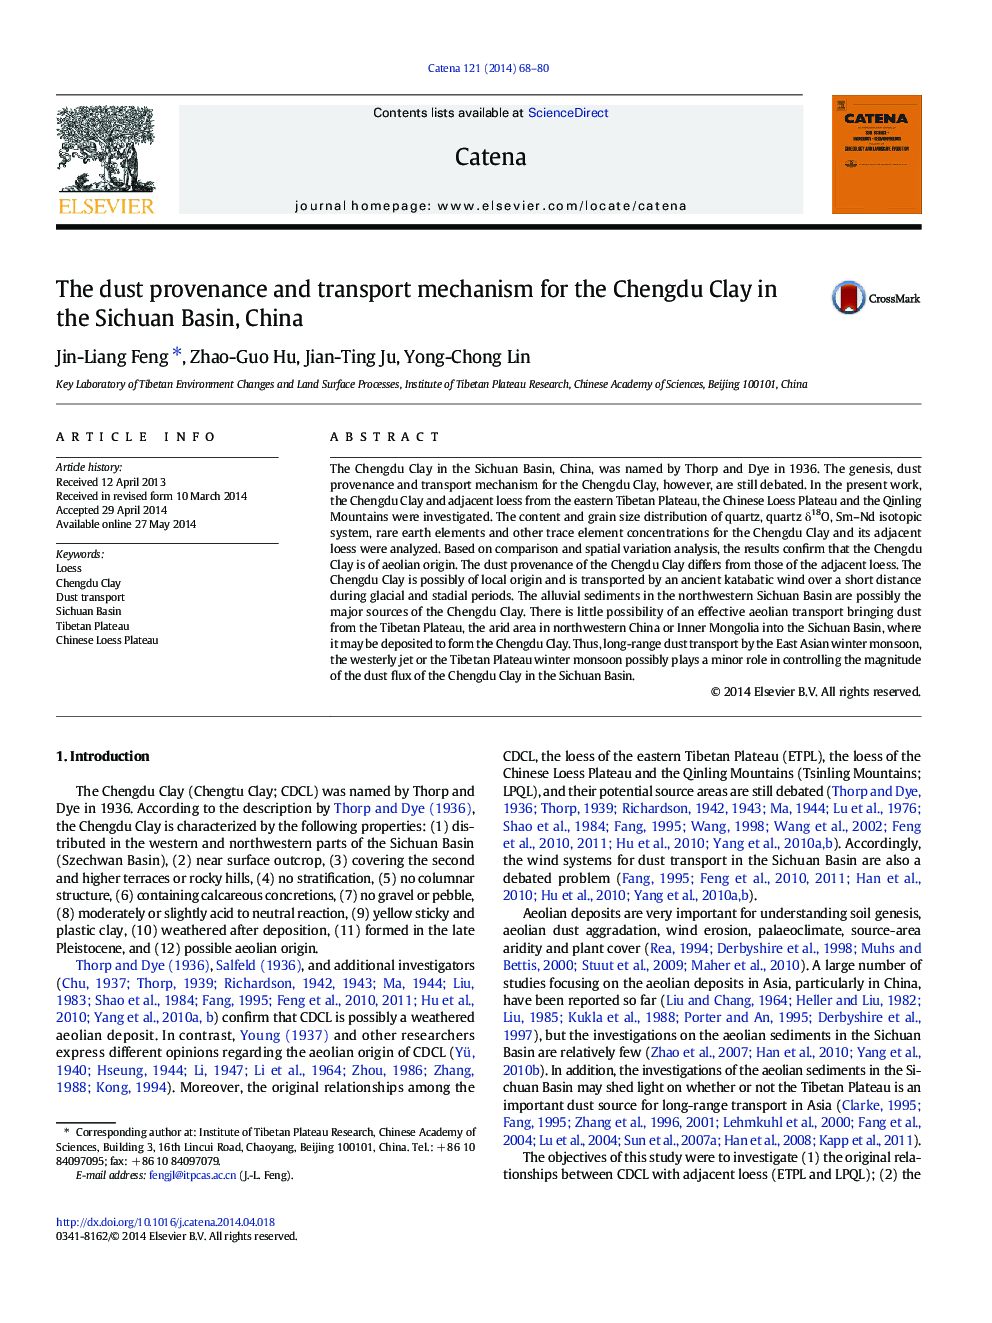 The dust provenance and transport mechanism for the Chengdu Clay in the Sichuan Basin, China